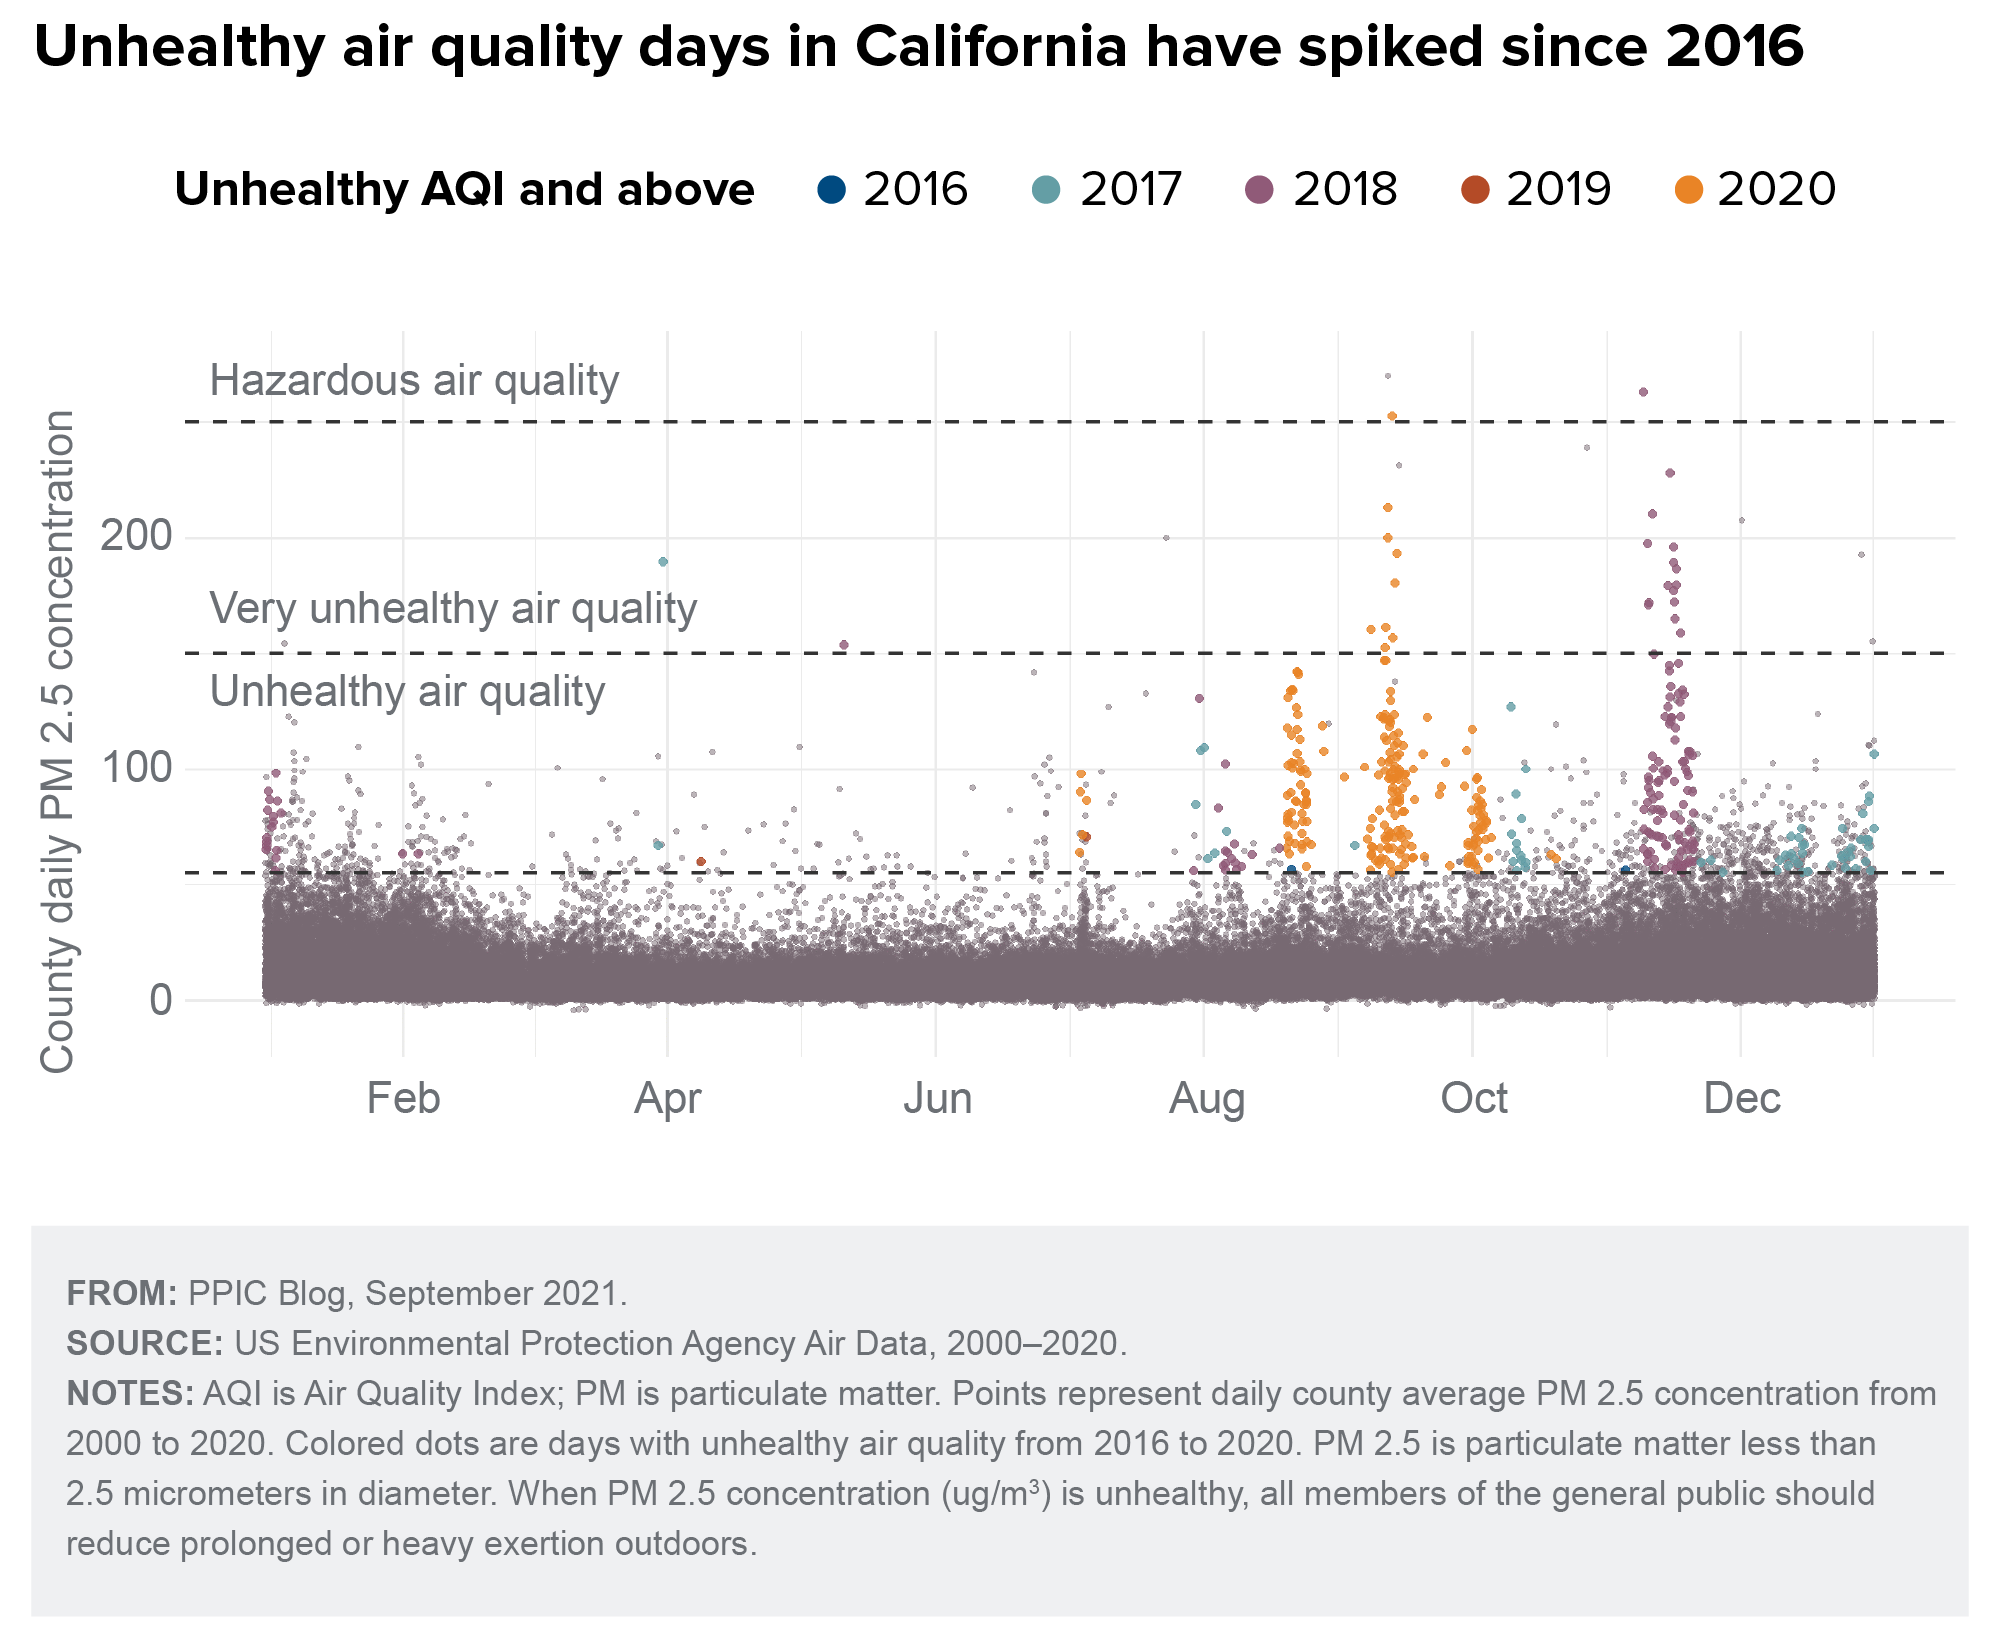 figure - Unhealthy air quality days in California have spiked since 2016